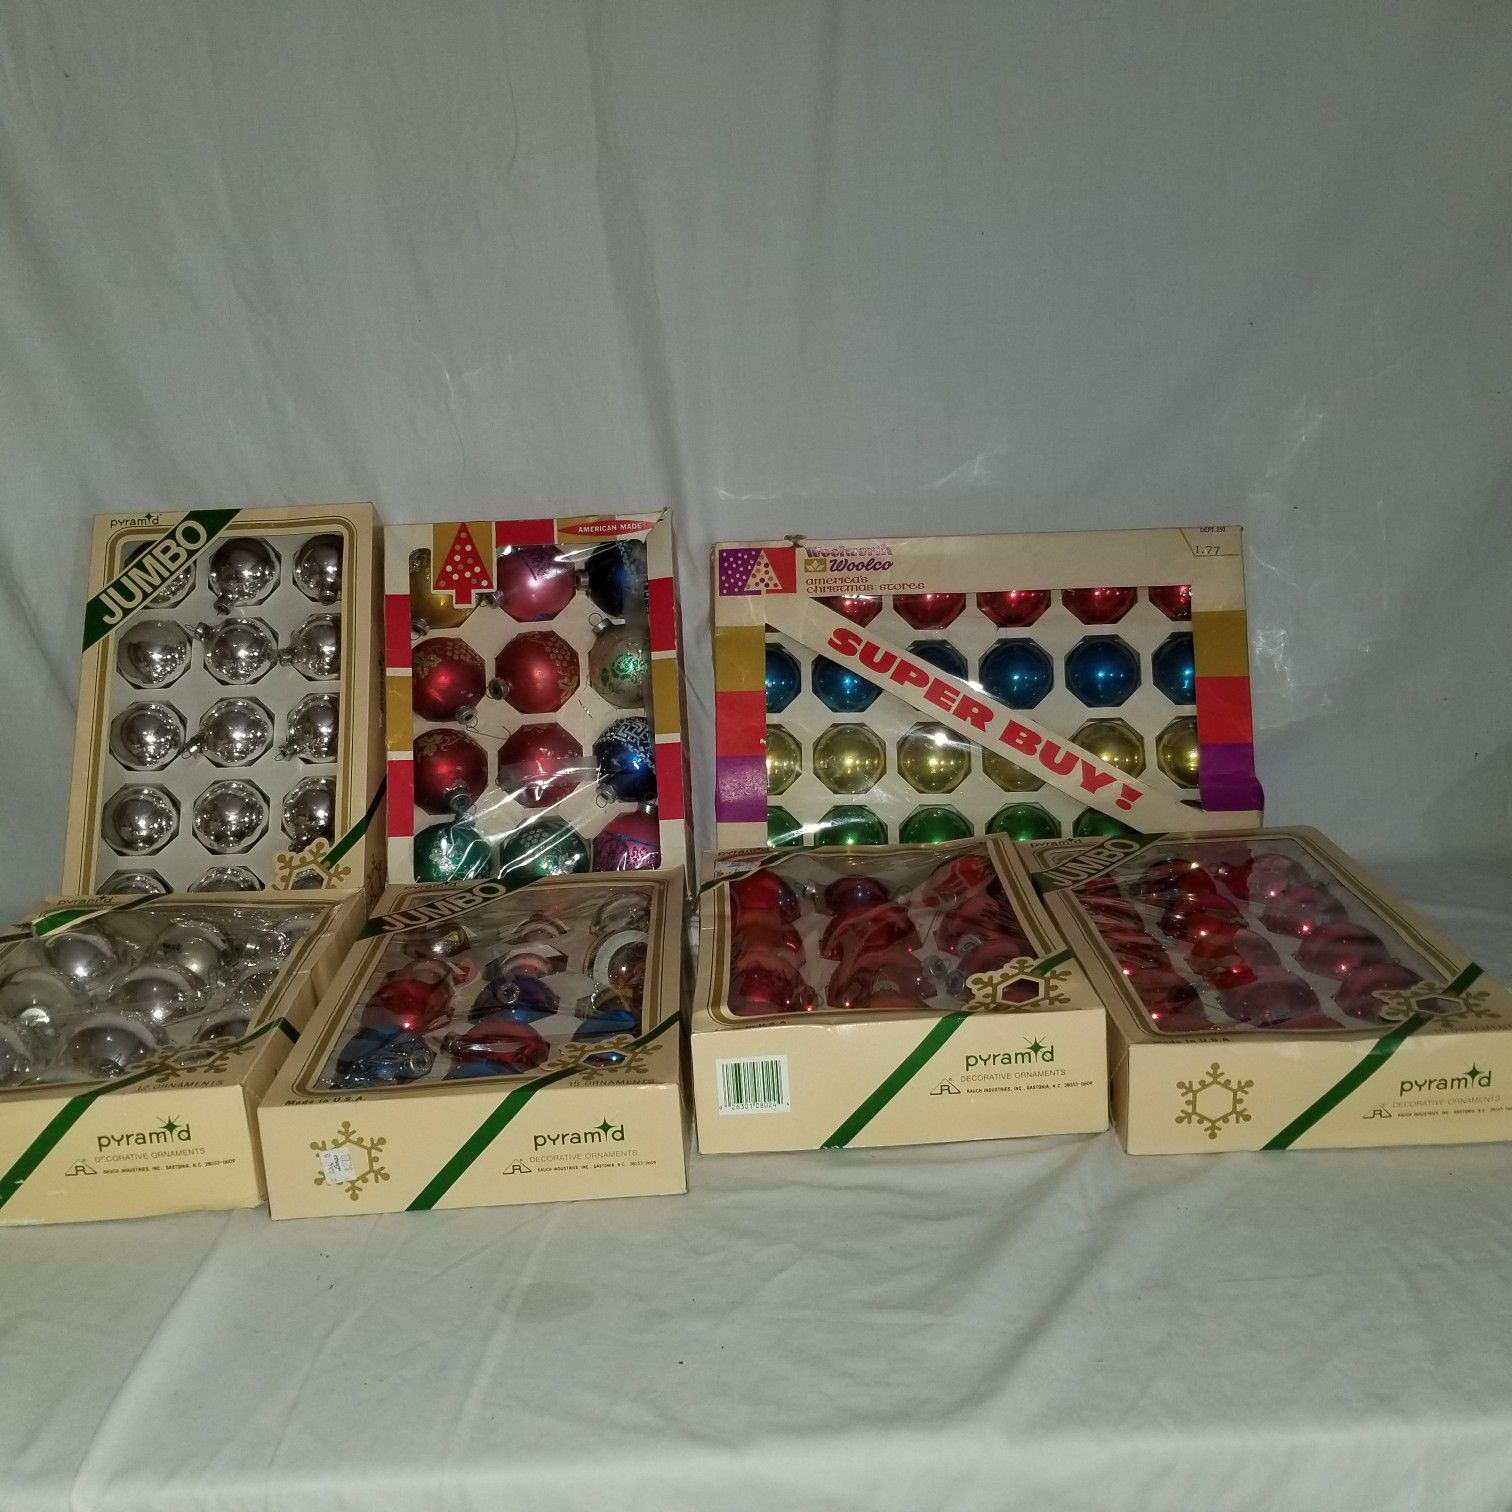 Vintage Shiny Brite, Pyramid, Woolworth and other Christmas ornaments - 250+